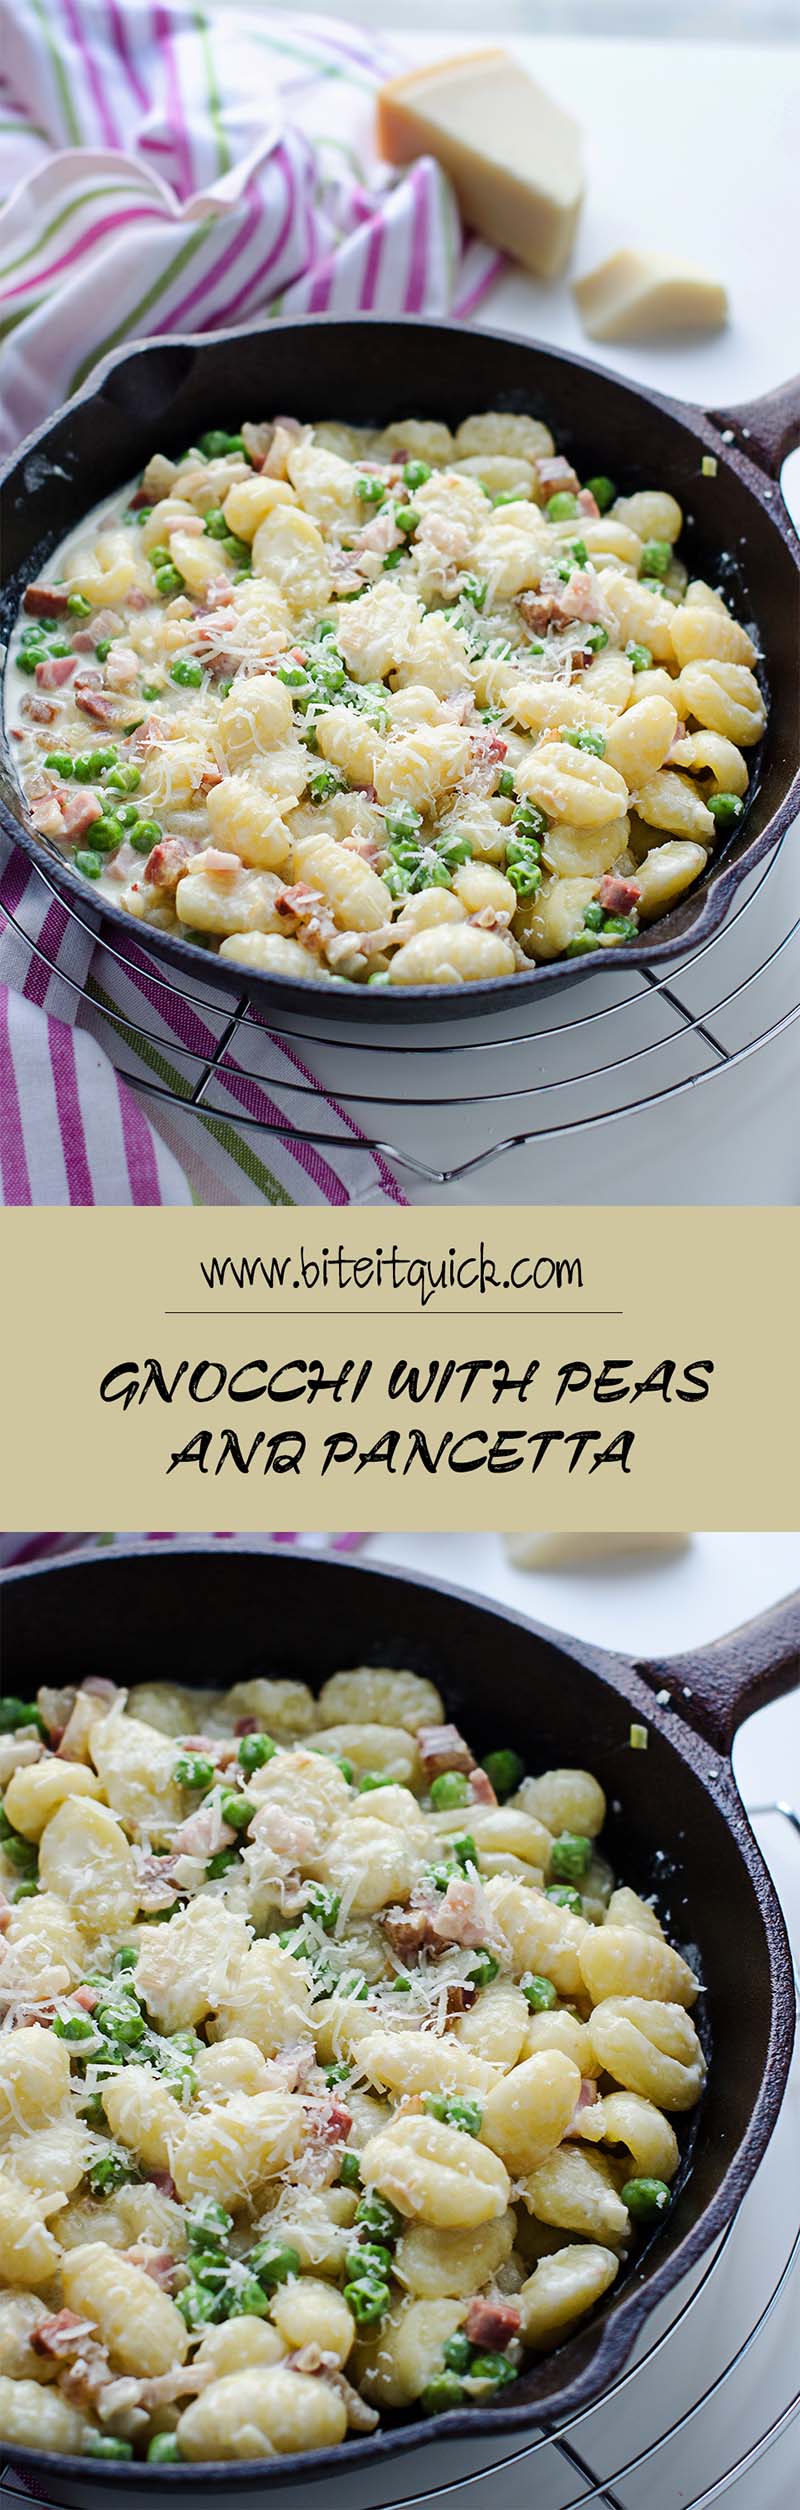 Gnocchi with Peas and Pancetta